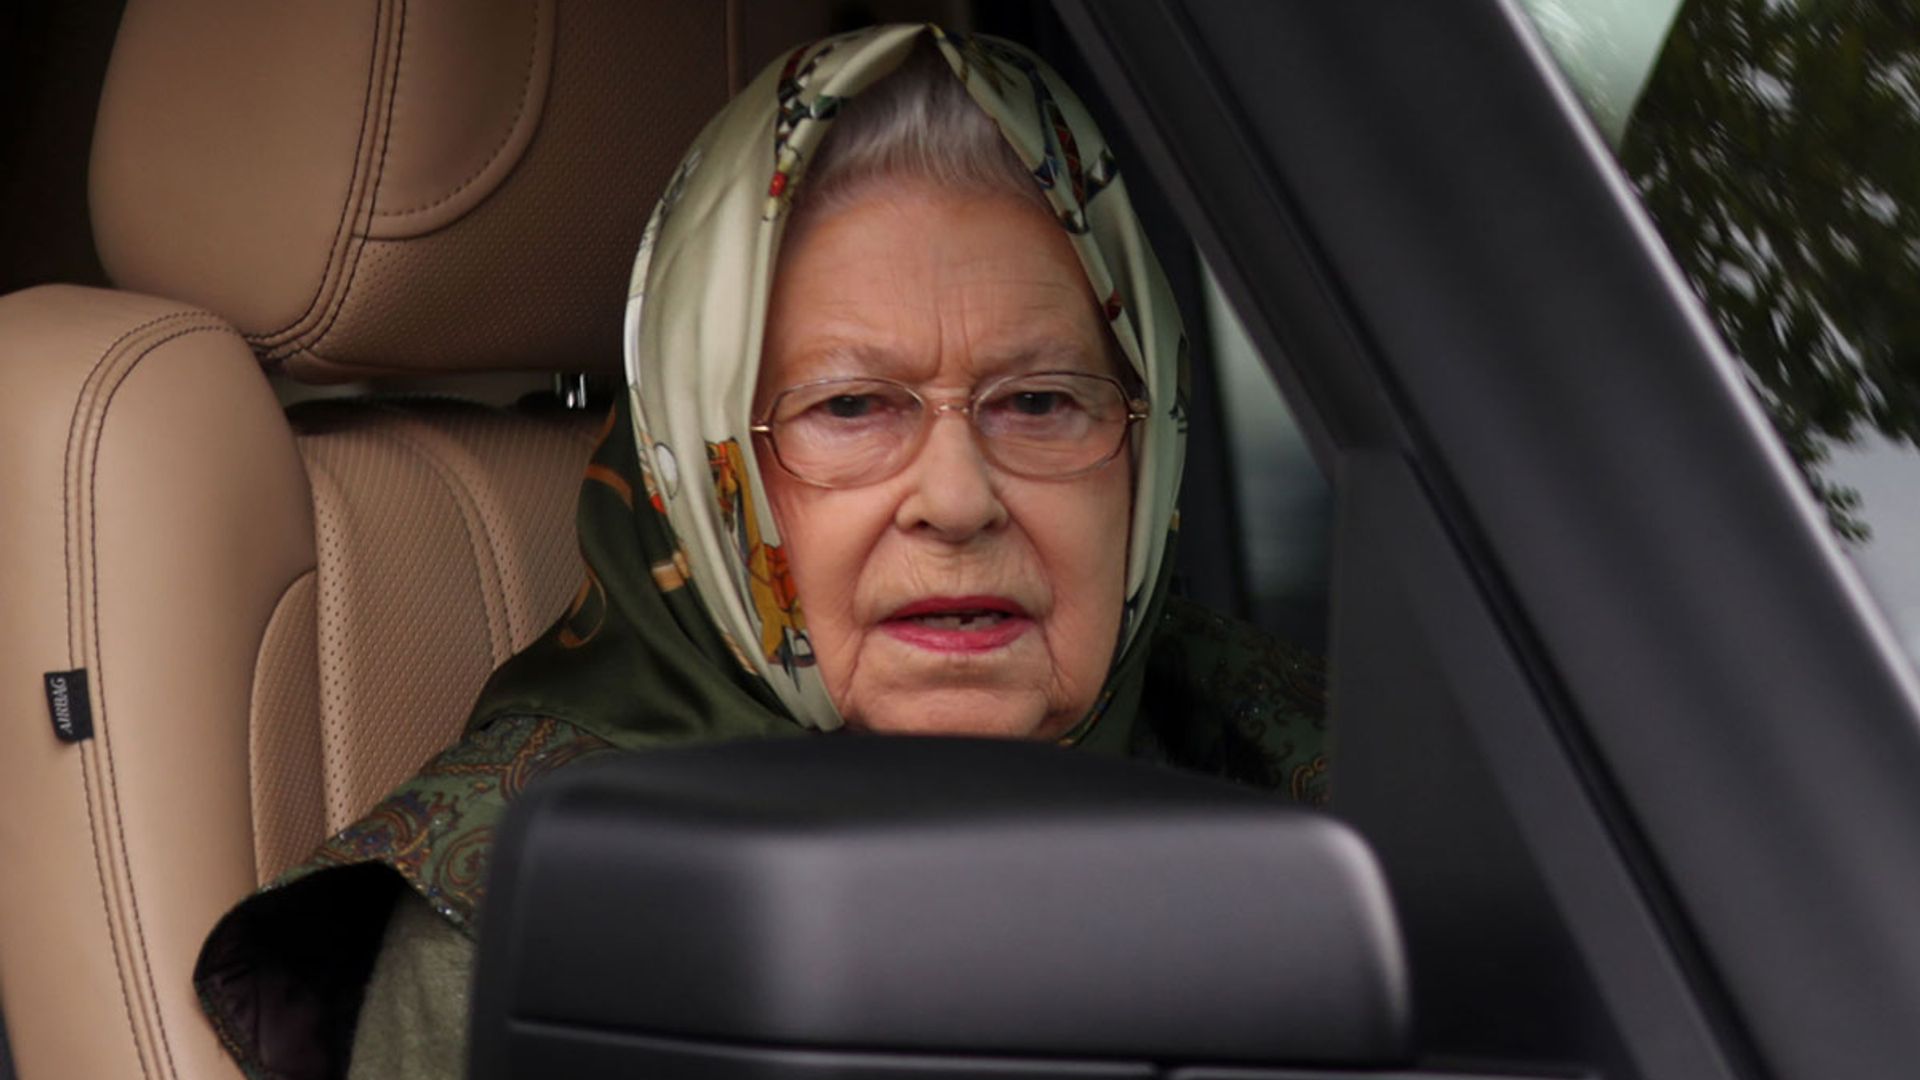 the queen driving